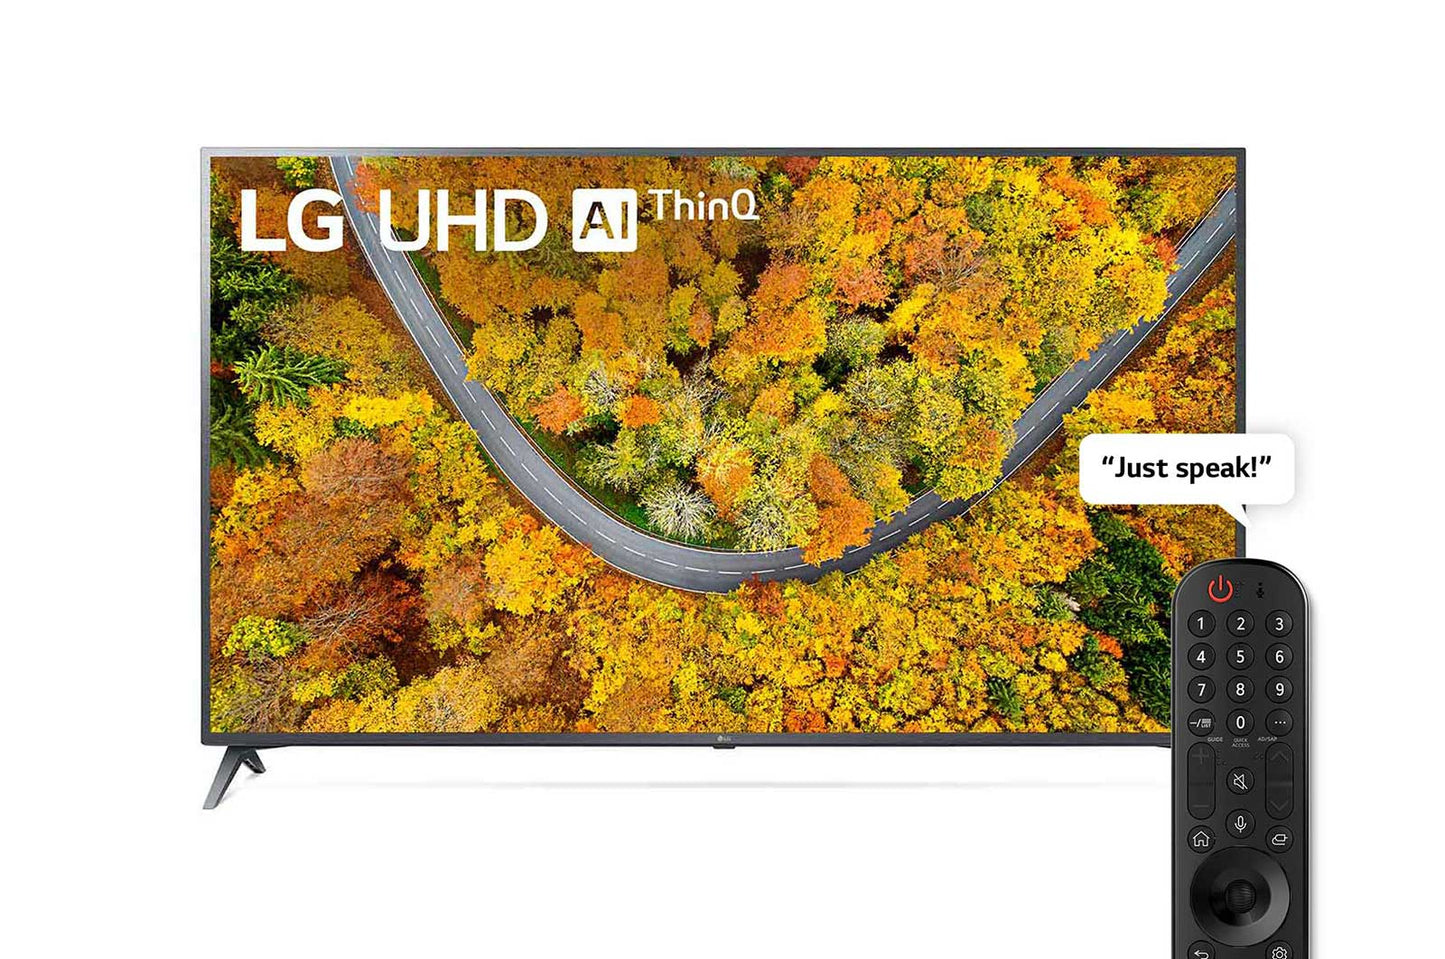 LG UHD TV 70 Inch UP75 Series 4K Active HDR WebOS Smart TV with ThinQ AI (2021)